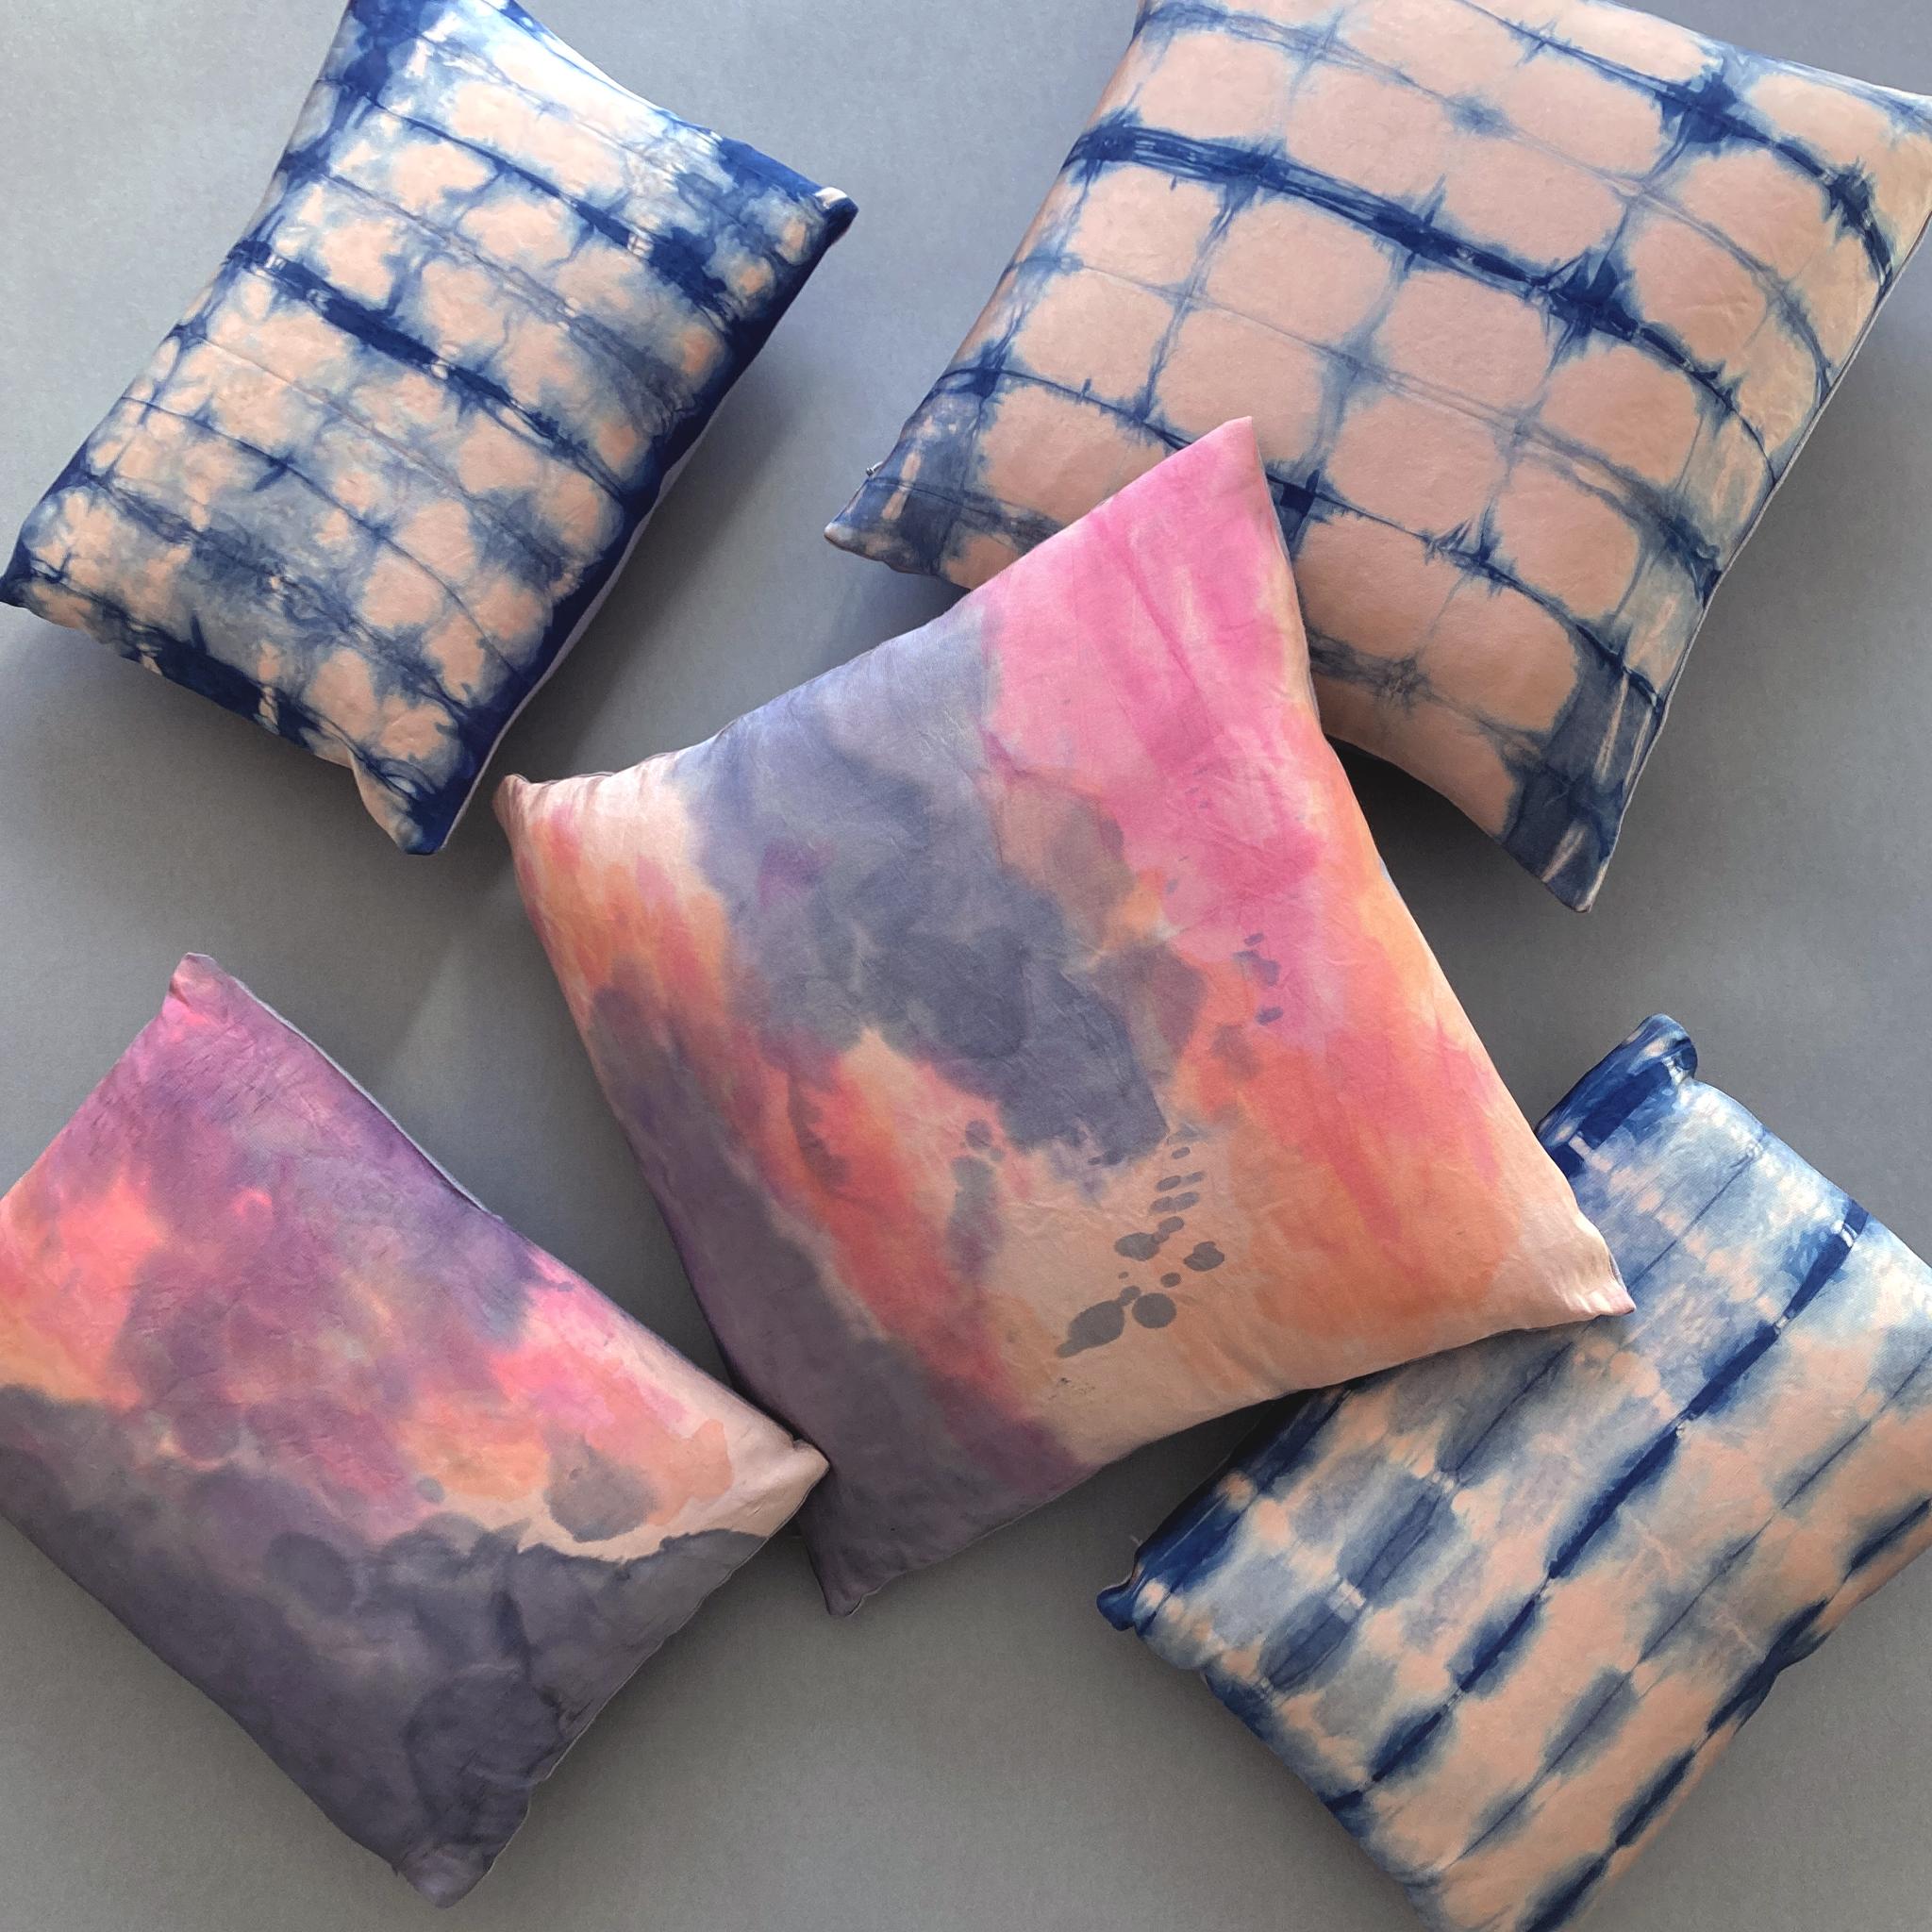 Blush silk faille pillow dyed with Magenta, Orange, and Gray in an abstract pattern with gray linen backing. Hand-painted and sewn in New York City, down pillow insert made locally in NYC. Pillow measures 12 x 16 inches. Each silk pillow is handmade